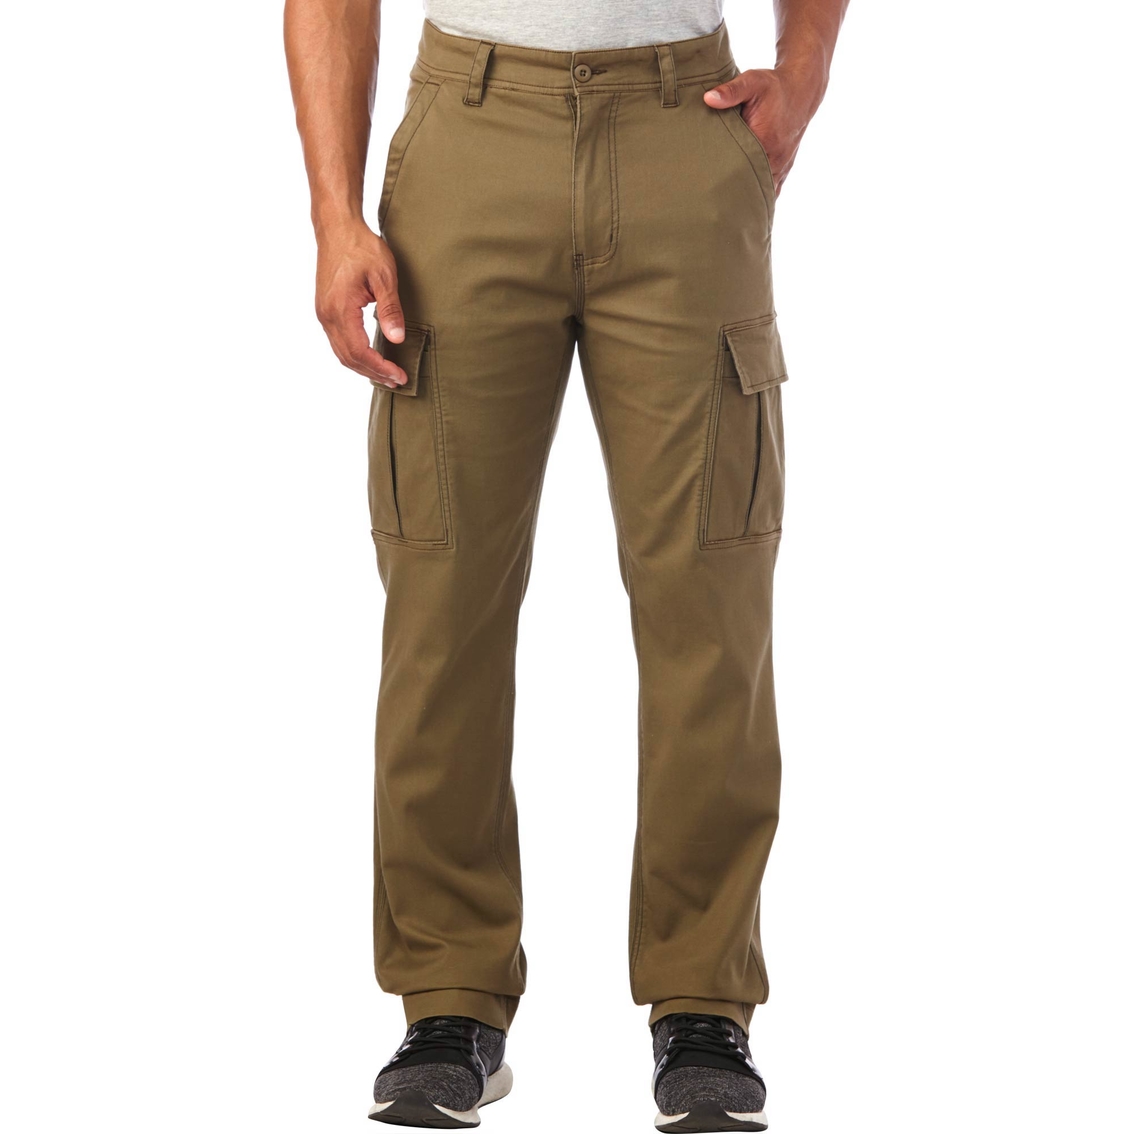 Wearfirst Stretch Pin Faille Cargo Pants | Pants | Clothing ...